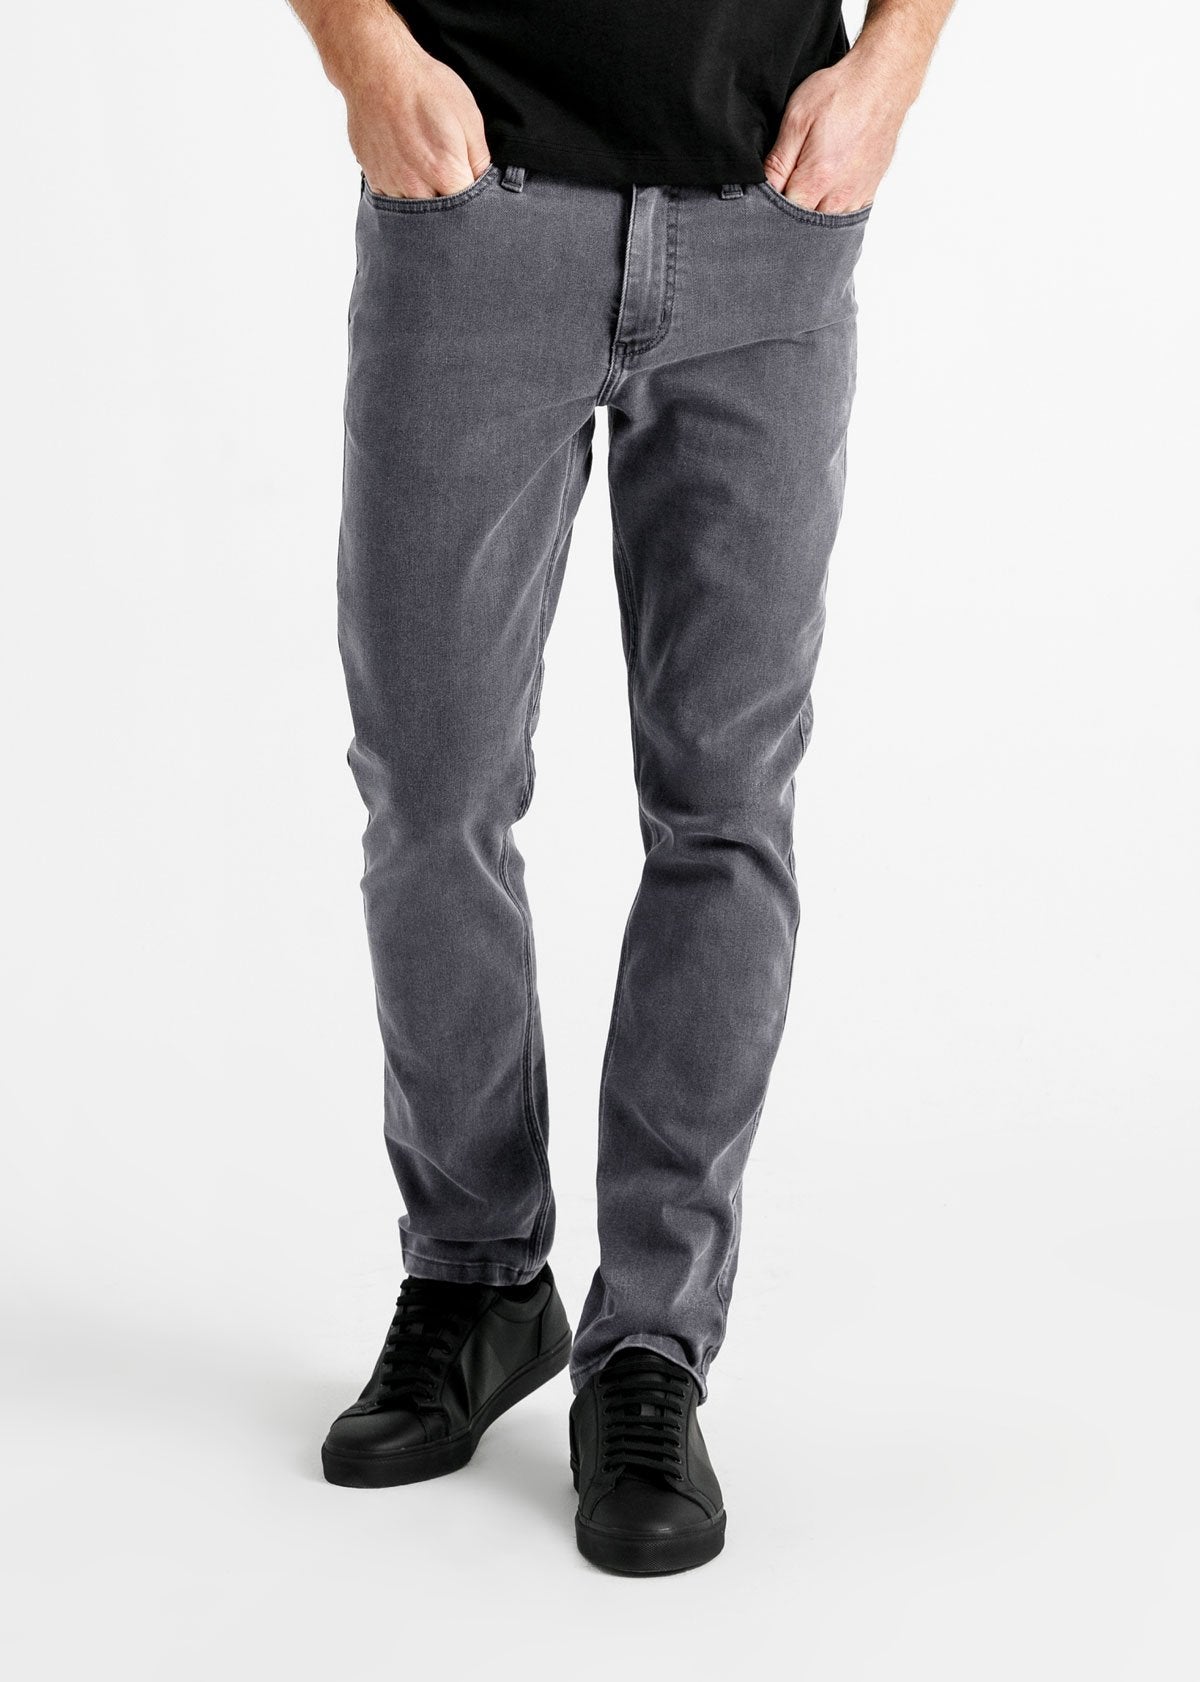 grey slim fit stretch jeans front